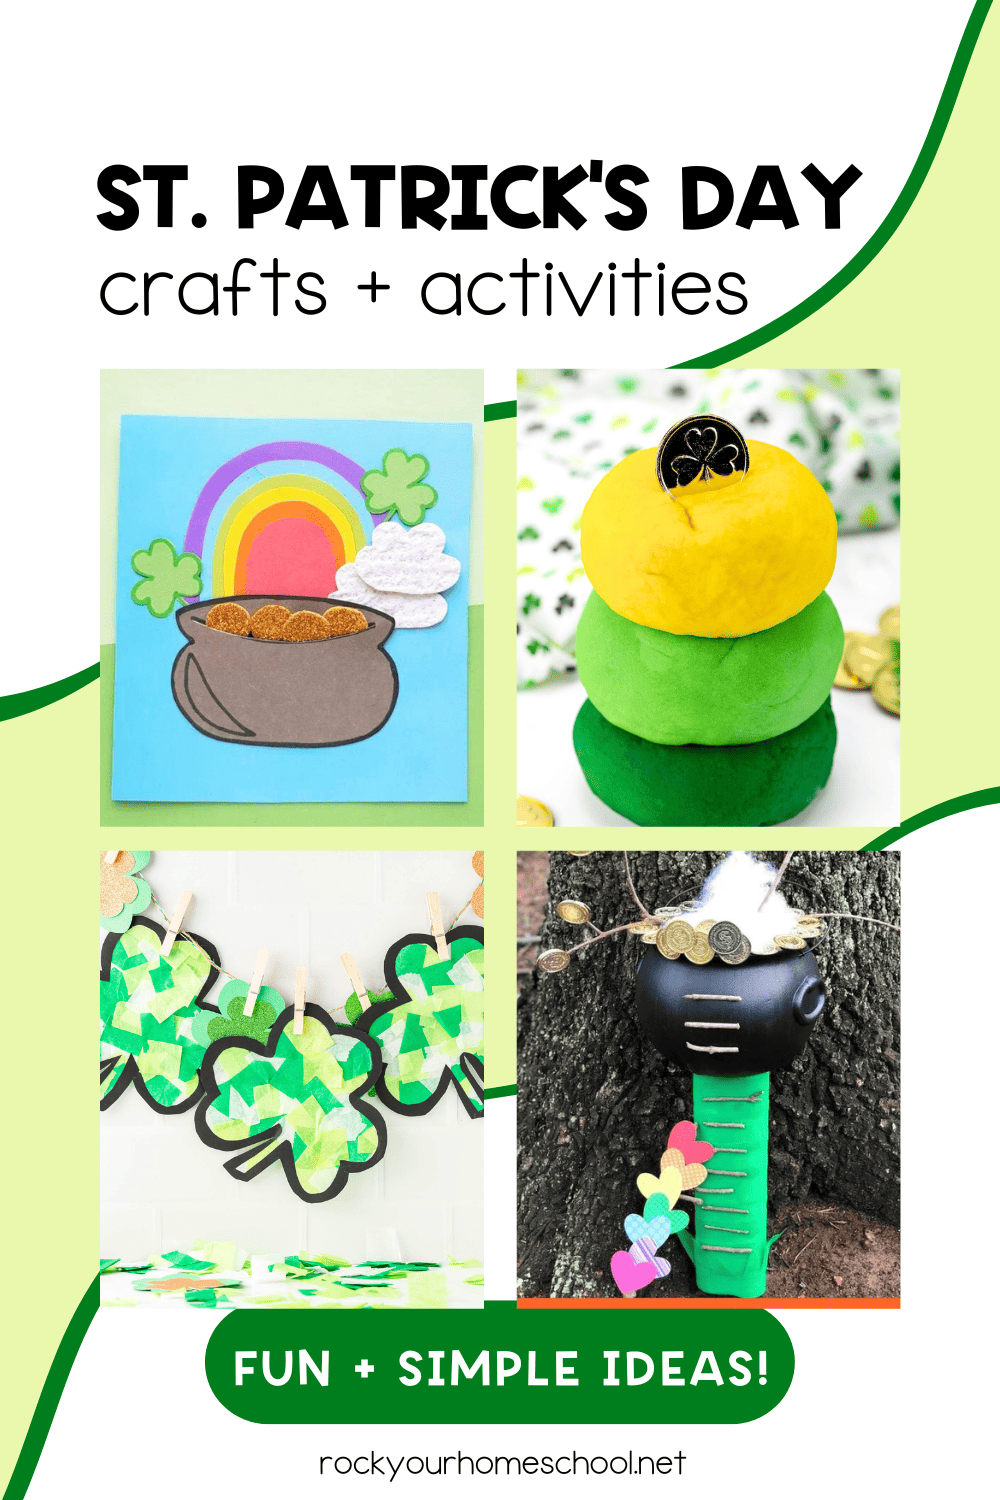 Examples of simple St. Patrick's Day crafts for kids featuring paper craft pot of gold, playdough, shamrock sun catchers, and leprechaun trap.